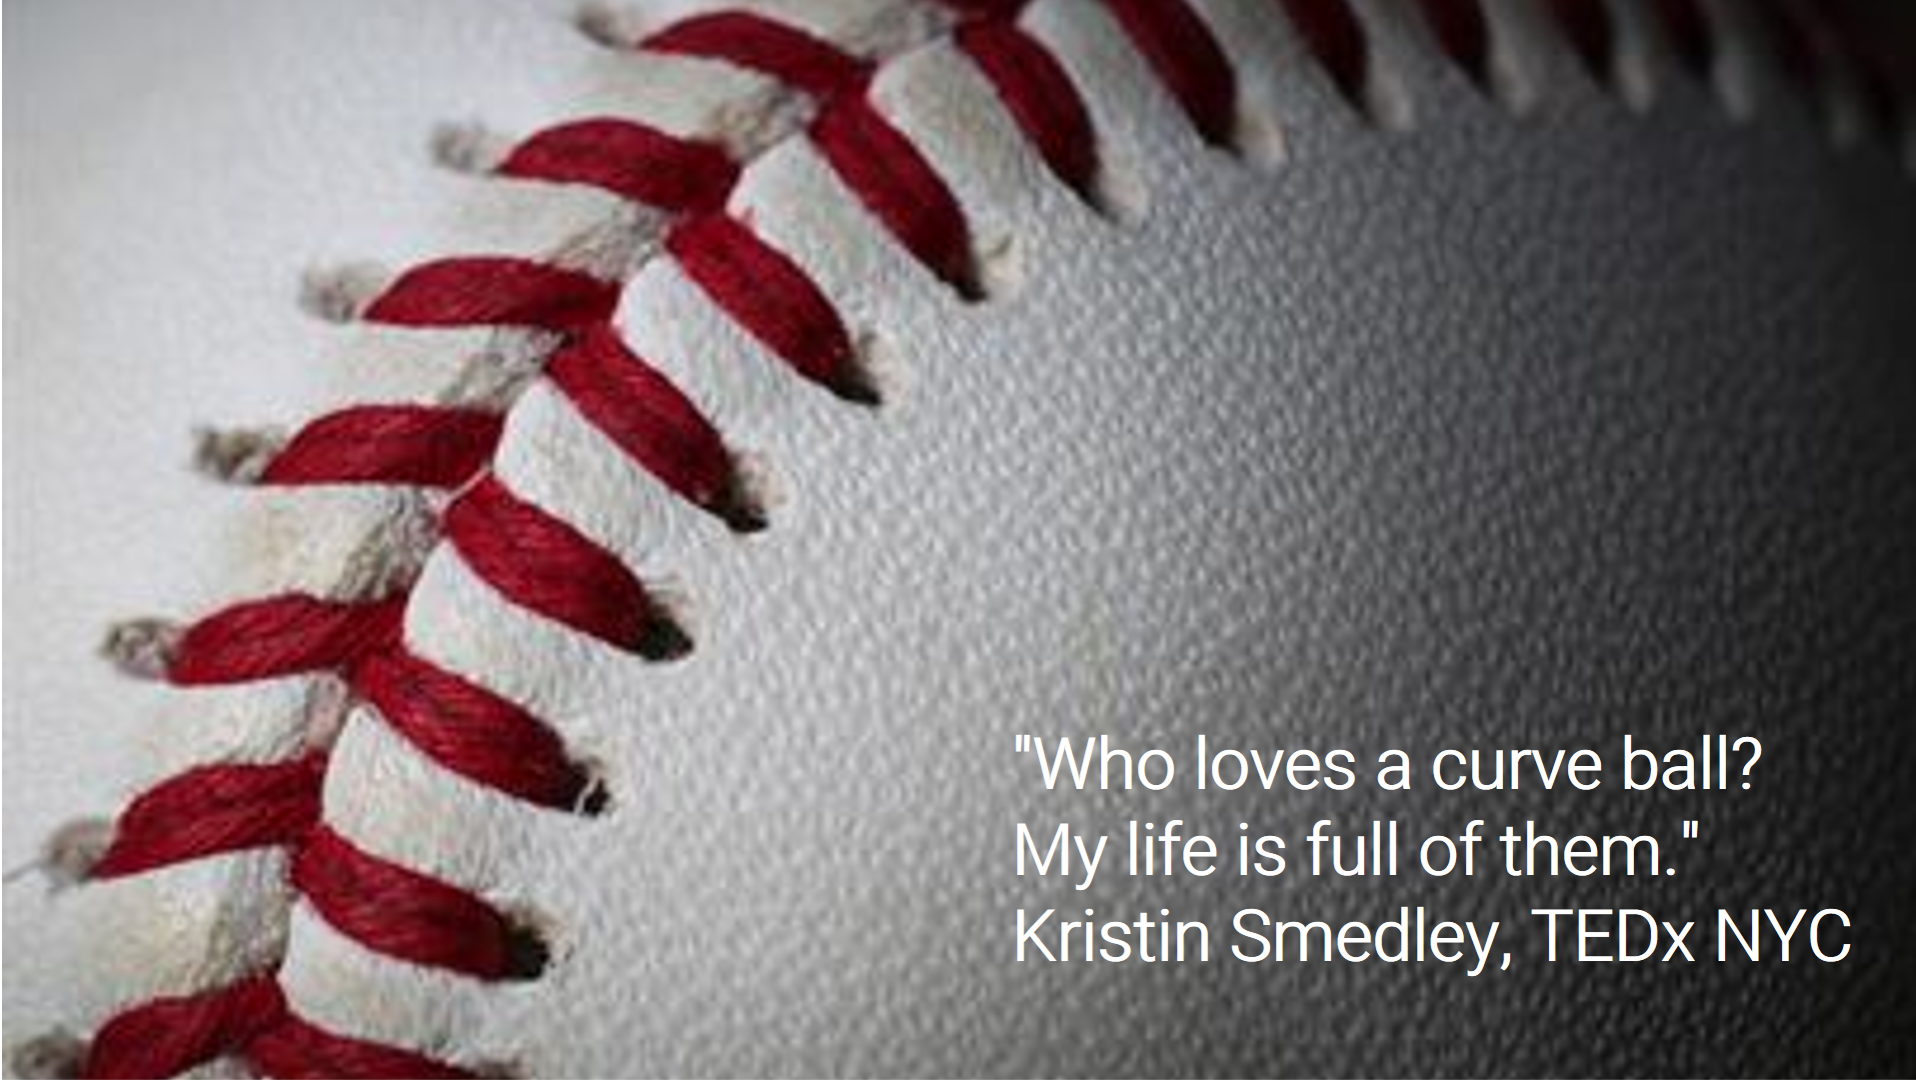 close up of a baseball and text reads: "Who loves a curve ball? My life is full of them." Kristin Smedley, TEDx NYC